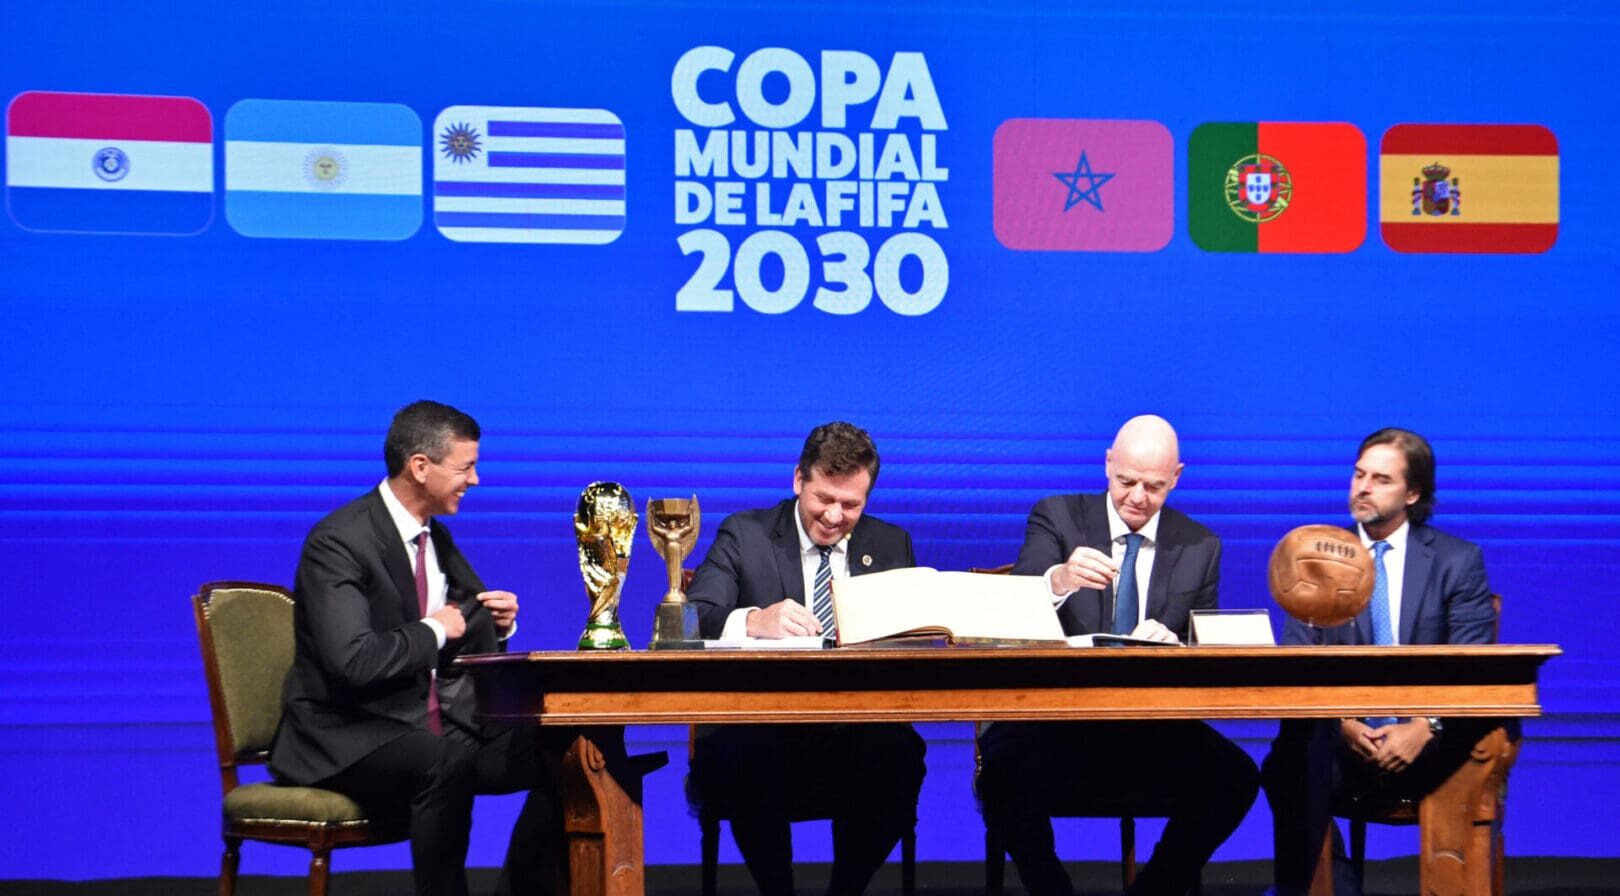 Conmebol's President Alejandro Dominguez (L-2) and FIFA President Gianni Infantino (R-2), accompanied by Paraguay's President Santiago PeÃ±a (L) and Uruguay's President Luis Lacalle(R), sign a book of minutes of the 2030 World Cup during Conmebol's 78th Ordinary Congress in Luque, Paraguay on April 11, 2024. (Photo by NORBERTO DUARTE / AFP) (Photo by NORBERTO DUARTE/AFP via Getty Images)